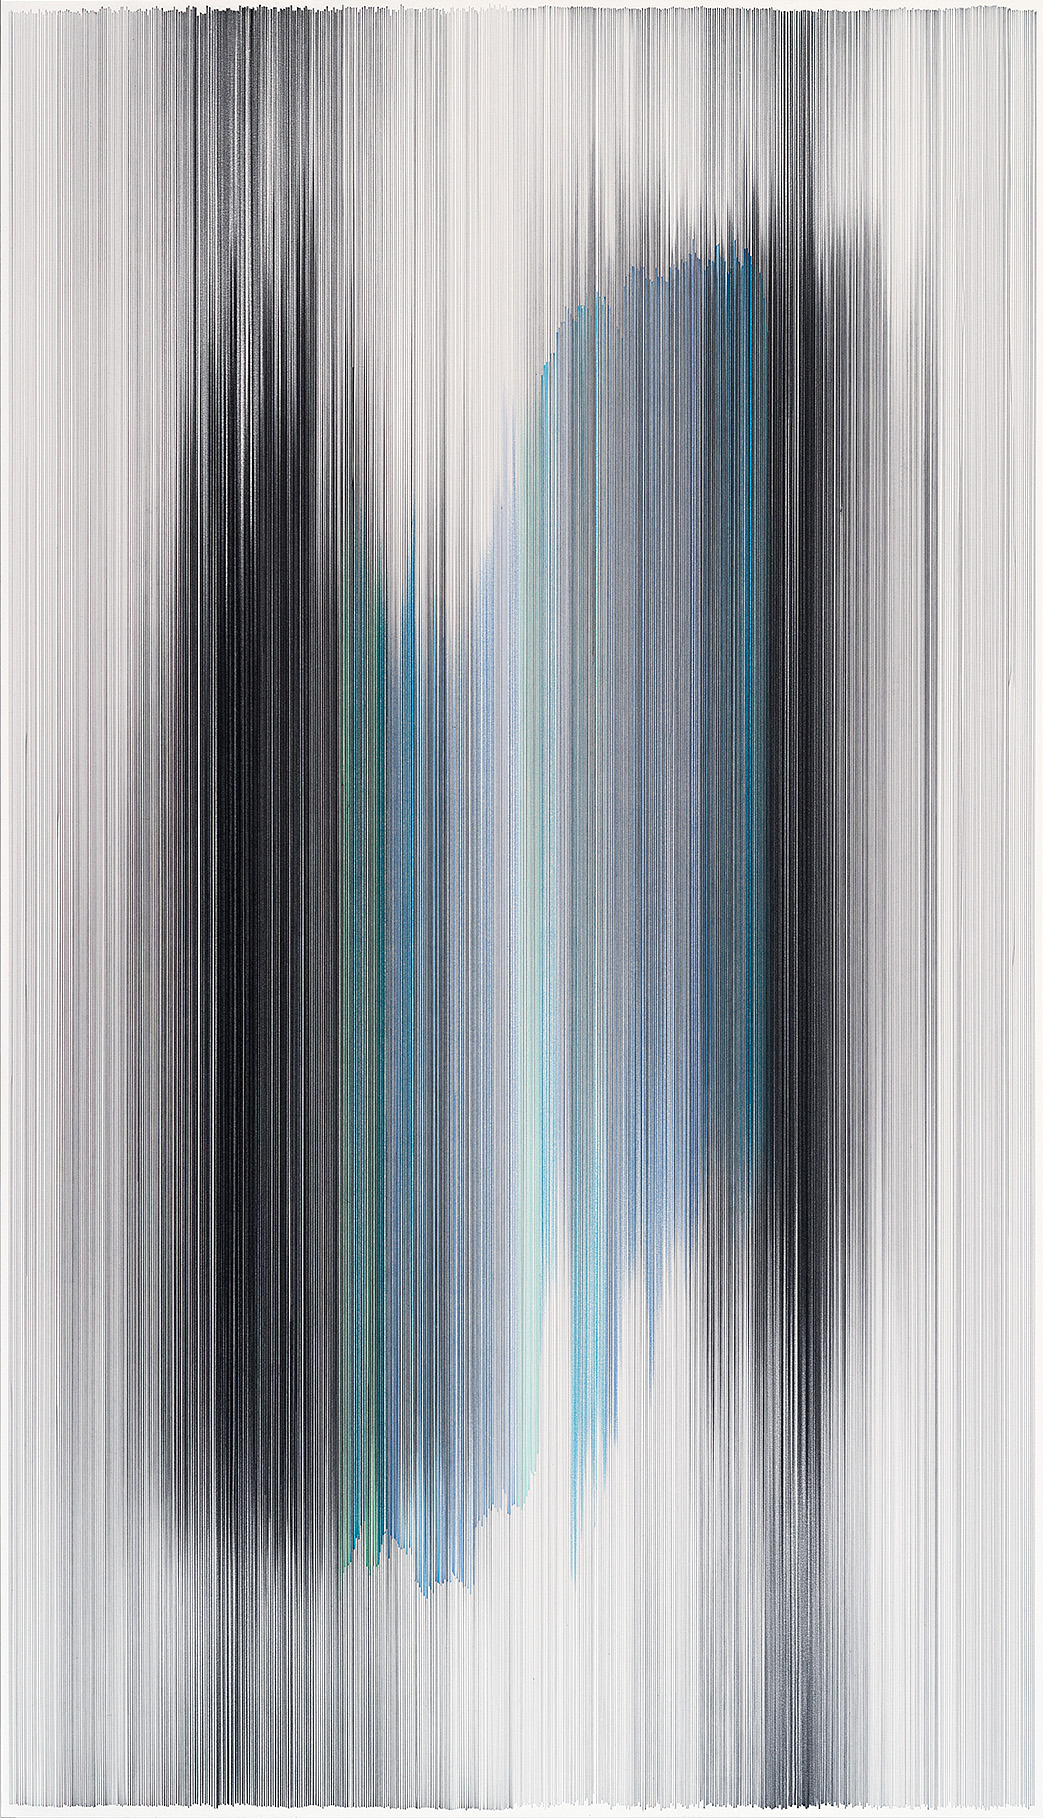    parallel 41   2014 graphite and colored pencil on mat board 59 x 34 inches 